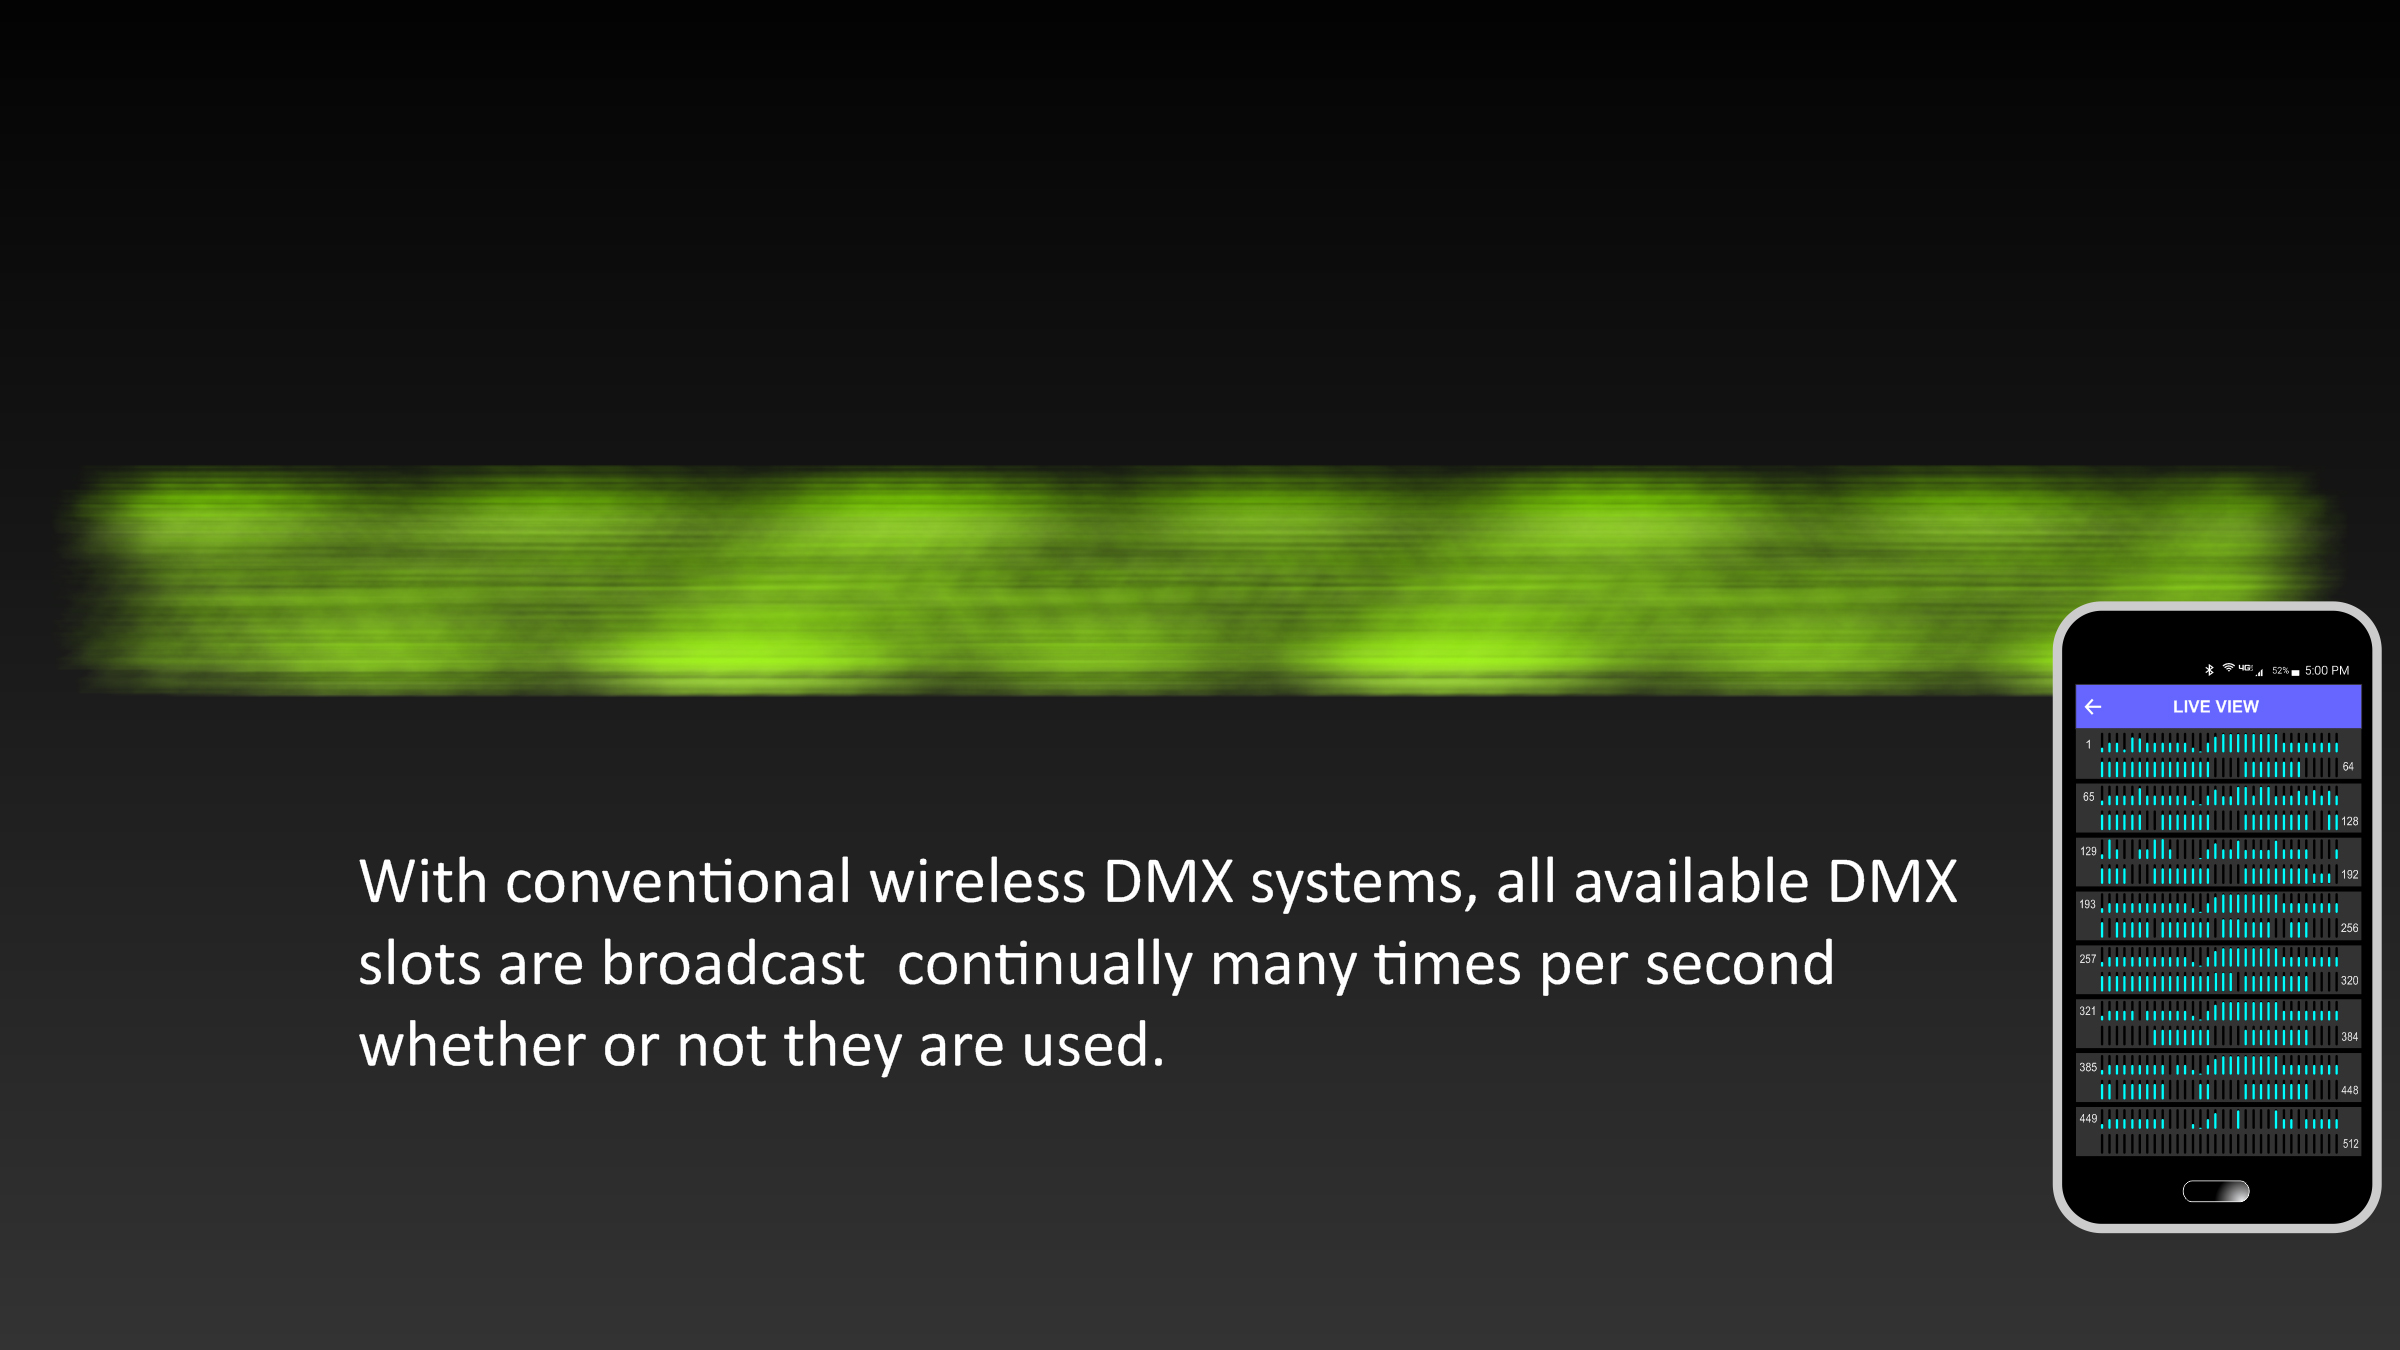 Multiverse 13 DMX Slots in Conventional wireless DMX systems